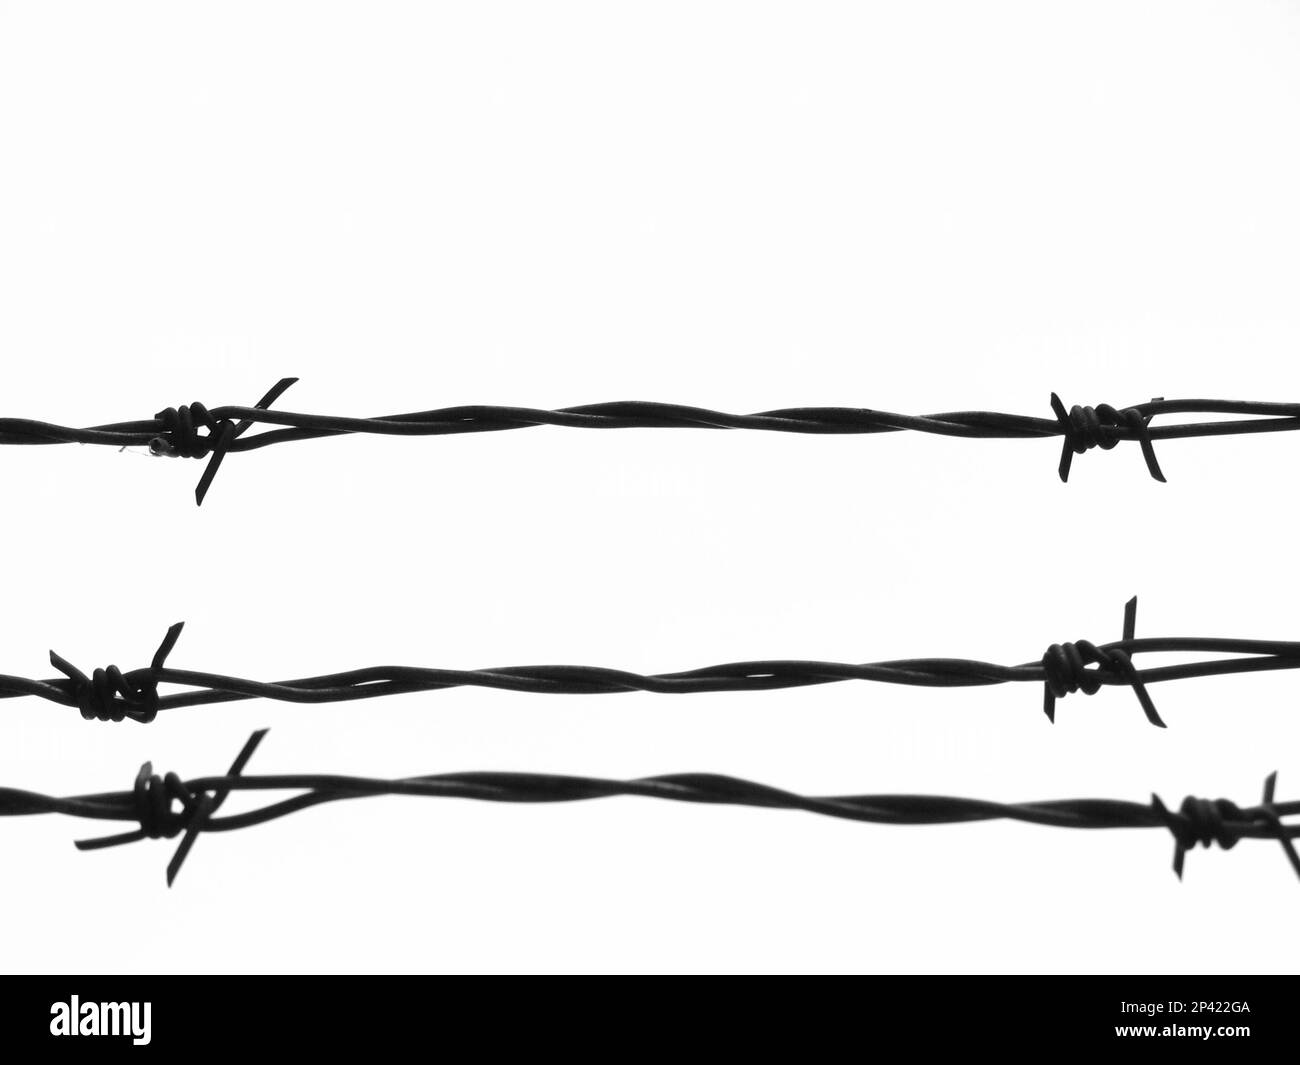 Black and white close up of three strands of a barbed wire security fence against a plain white background. Stock Photo